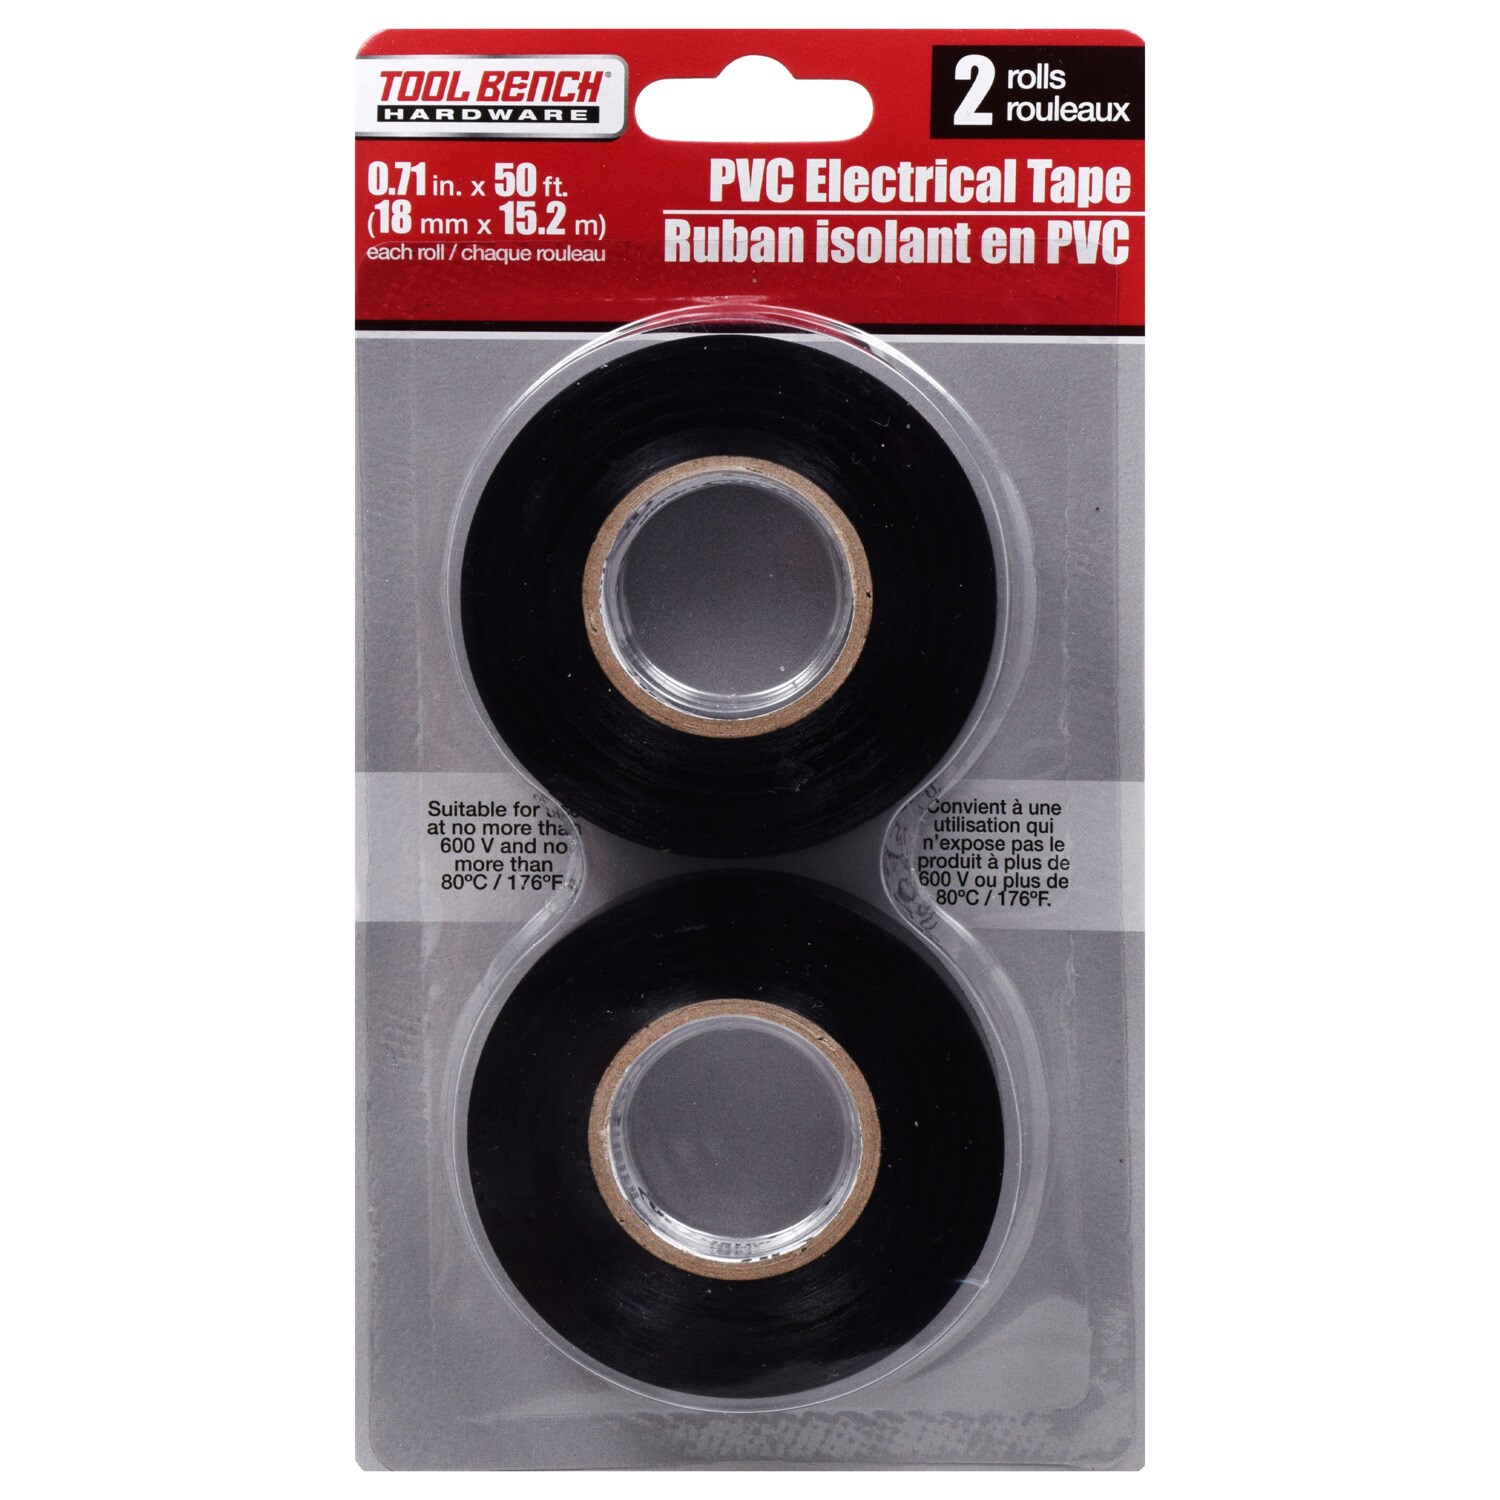 0.71 inch x 50 ft Tool Bench Hadware 4-count PVC Electrical tape 